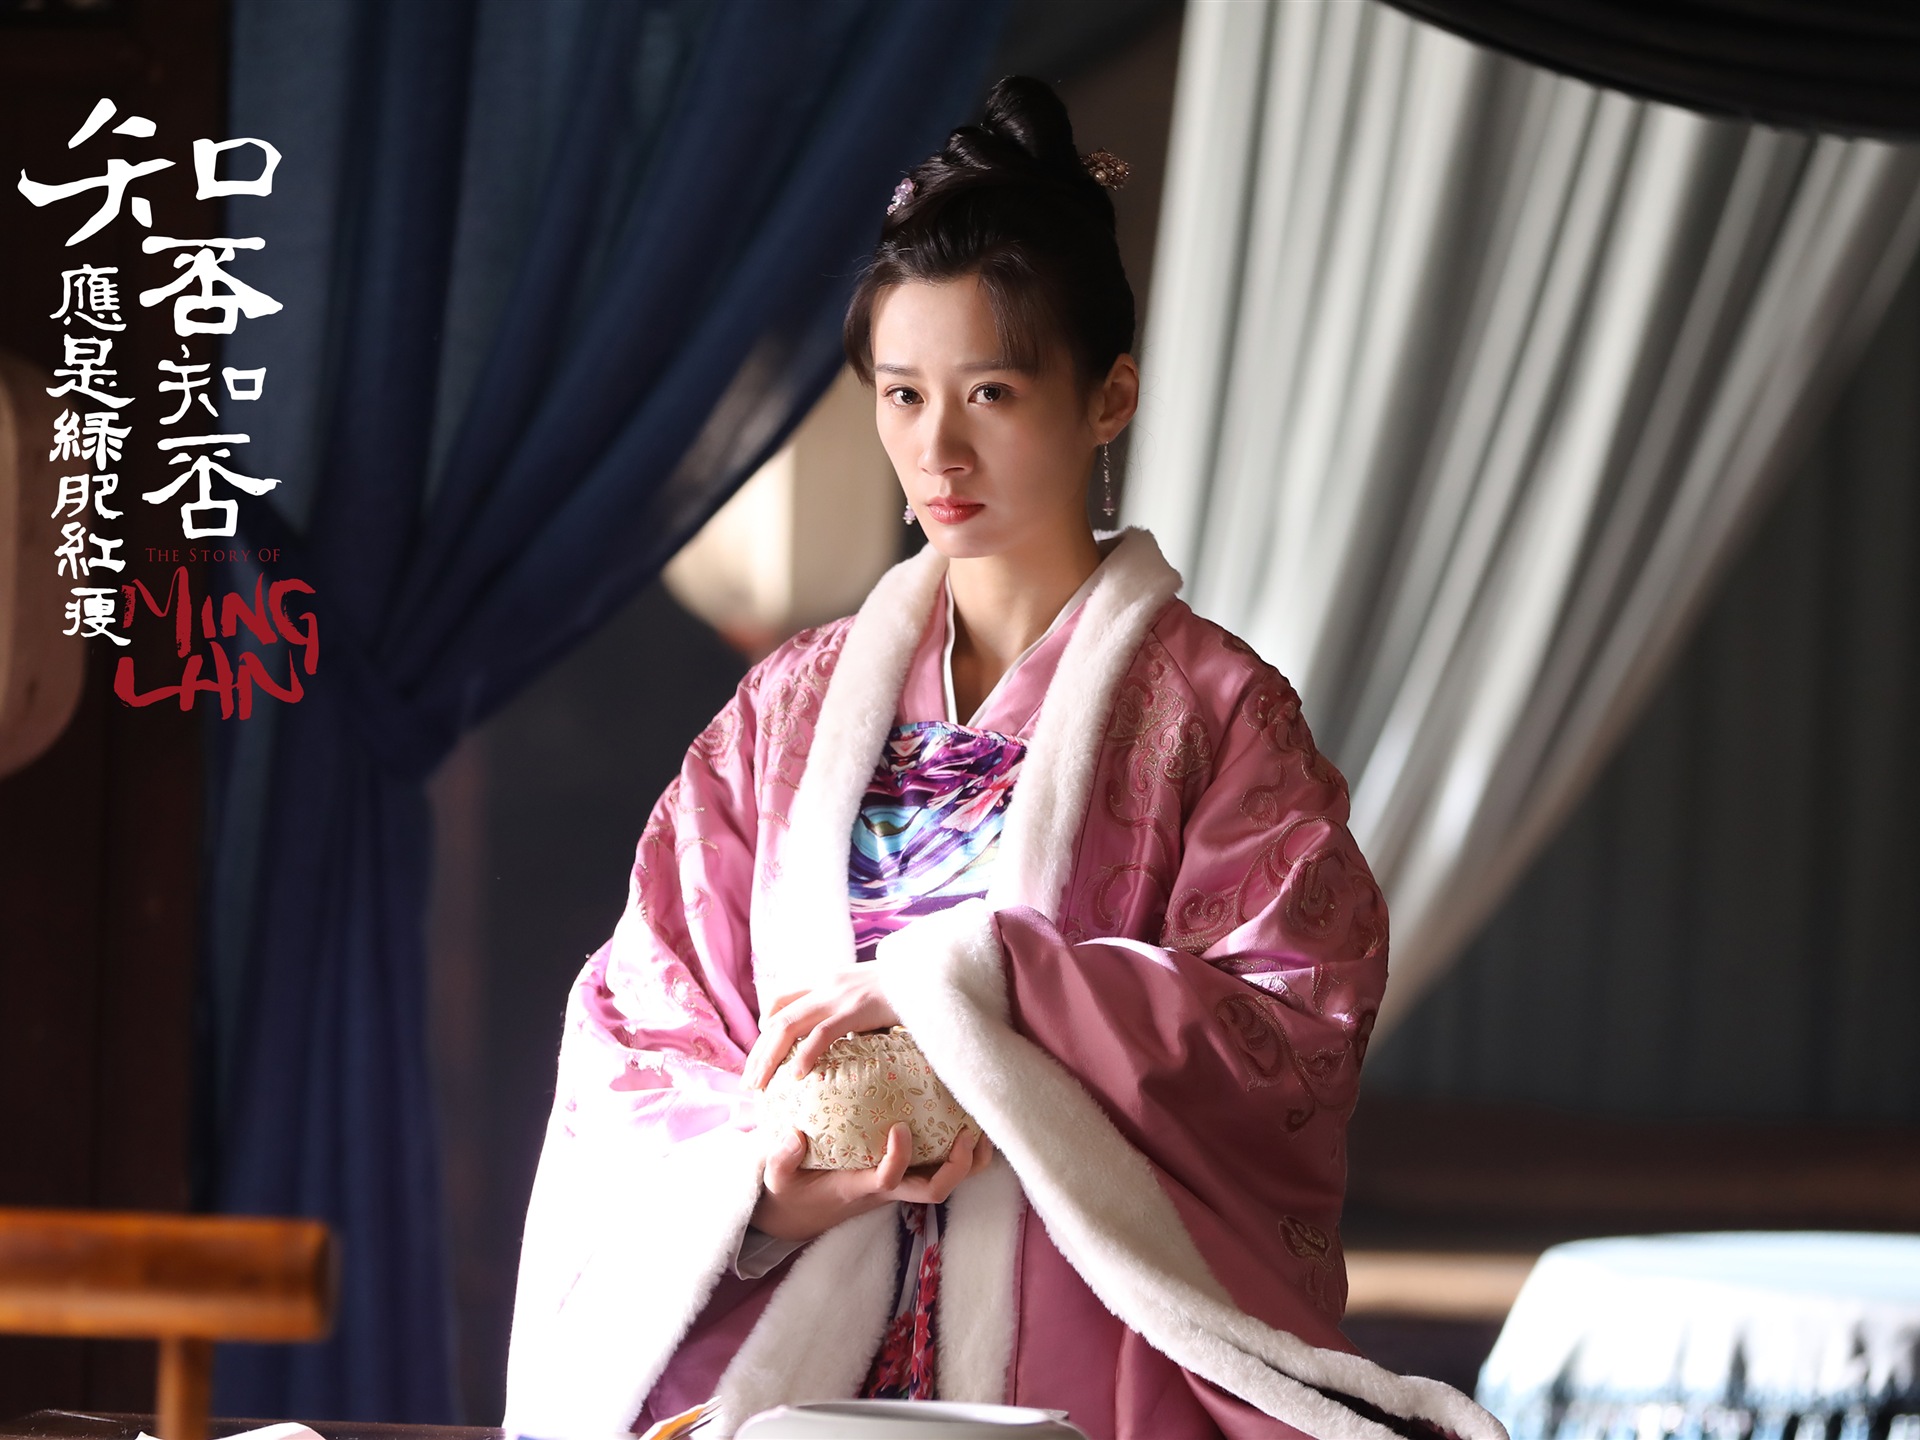 The Story Of MingLan, TV series HD wallpapers #18 - 1920x1440